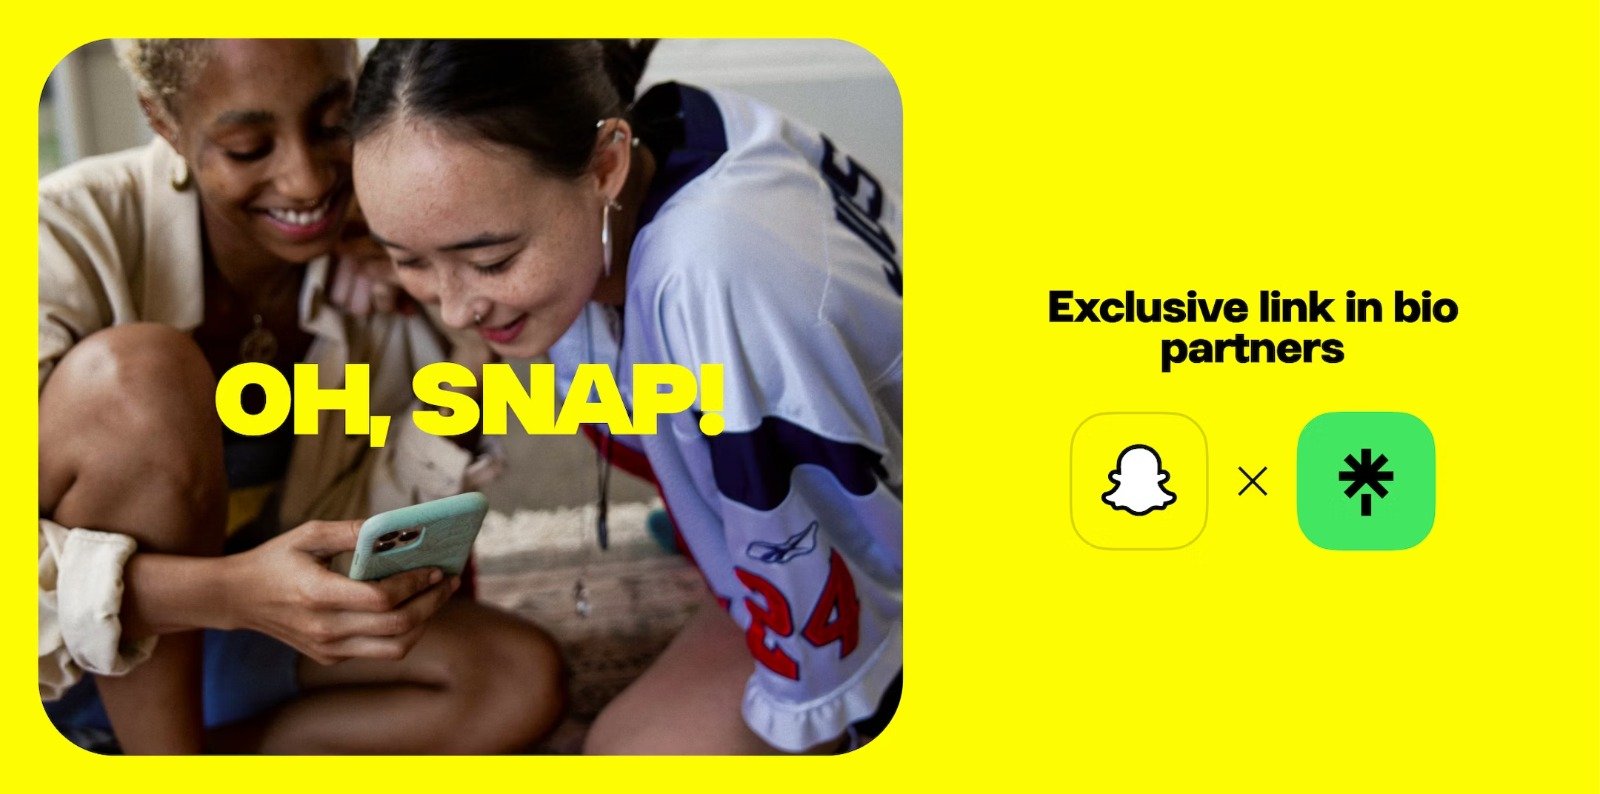 Snapchat To Now Let Users Add Links To Public Profiles